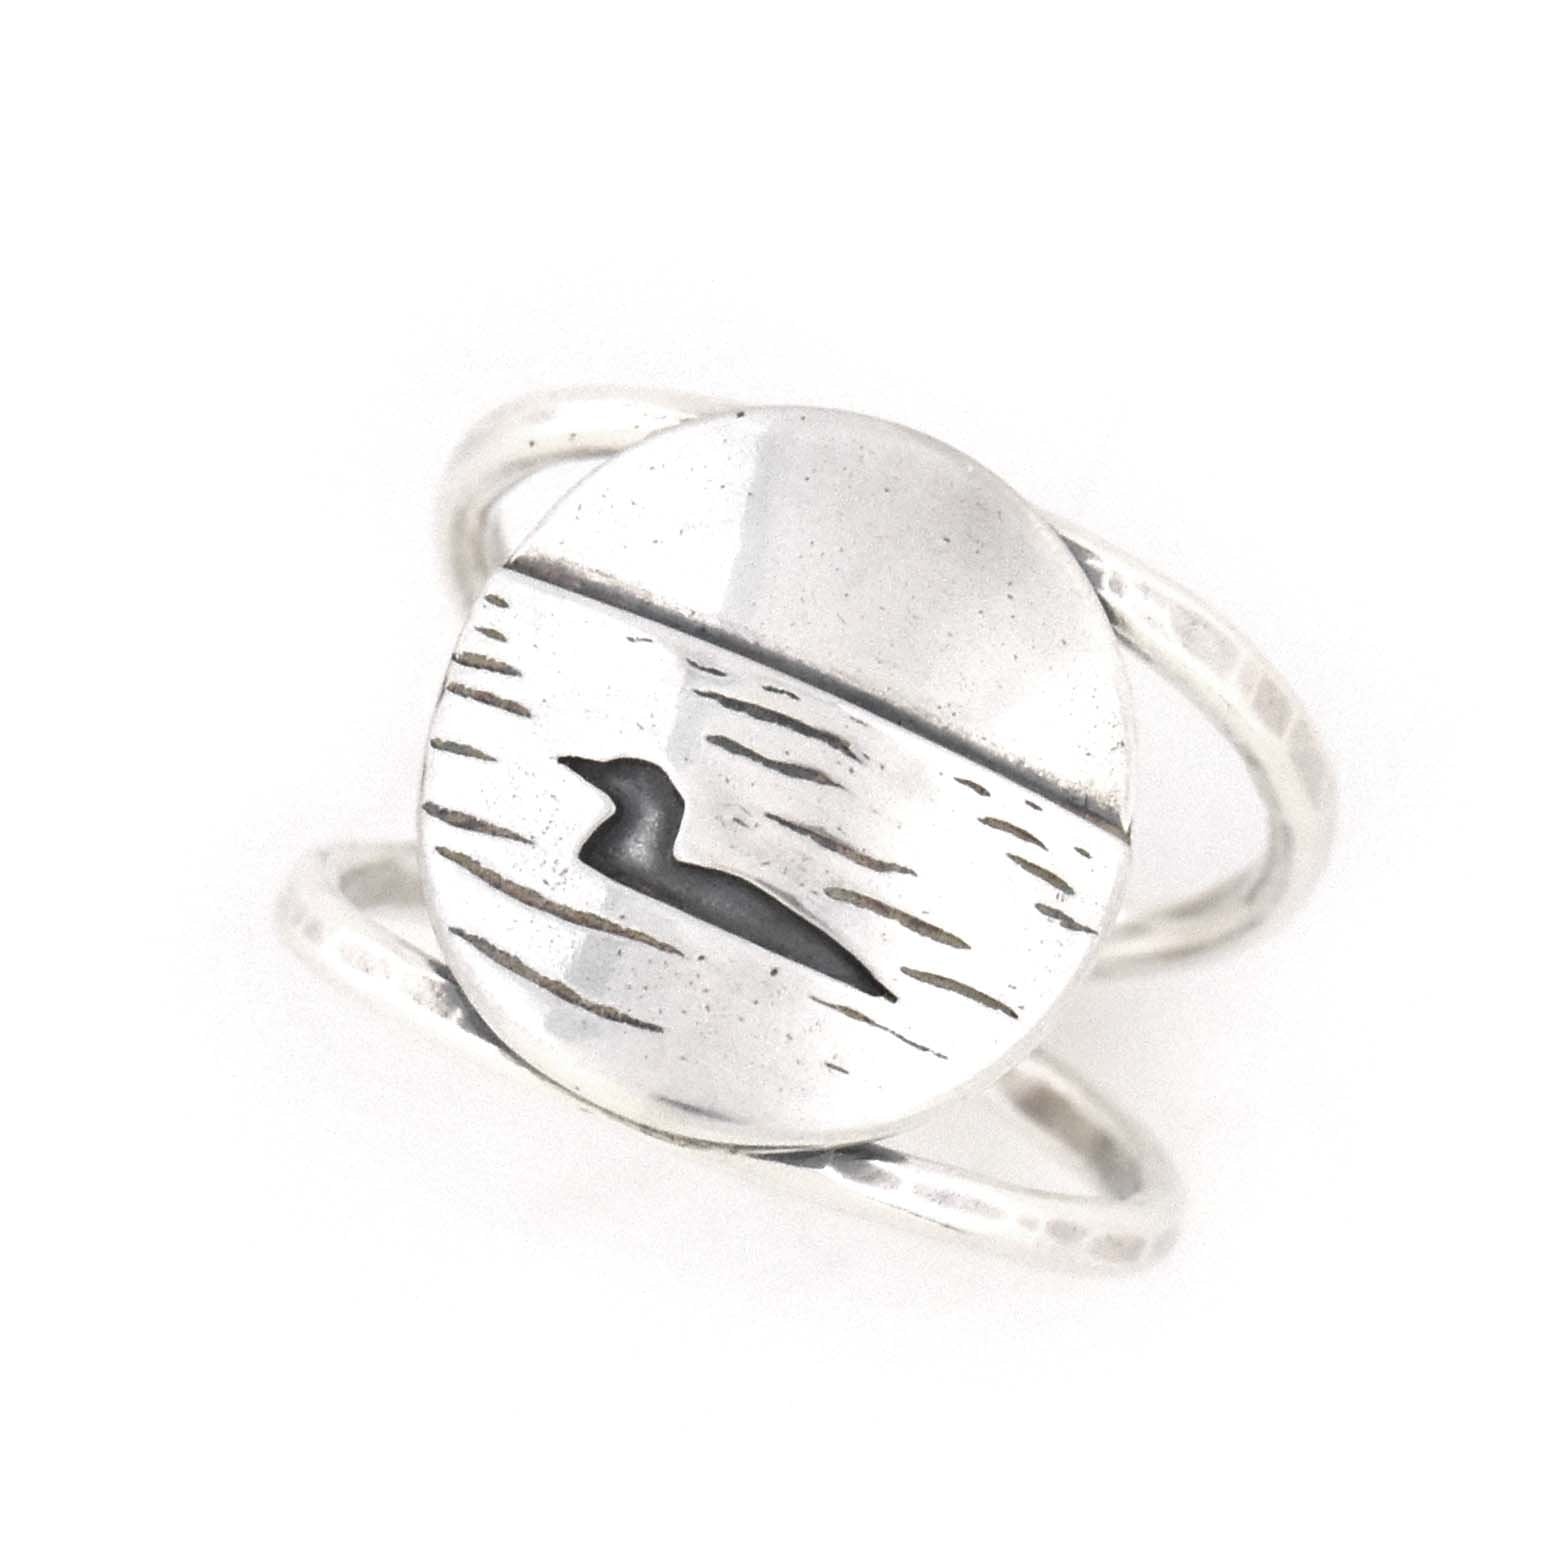 Loon Lake Ring - Ring  Select Size  4 5487 - handmade by Beth Millner Jewelry